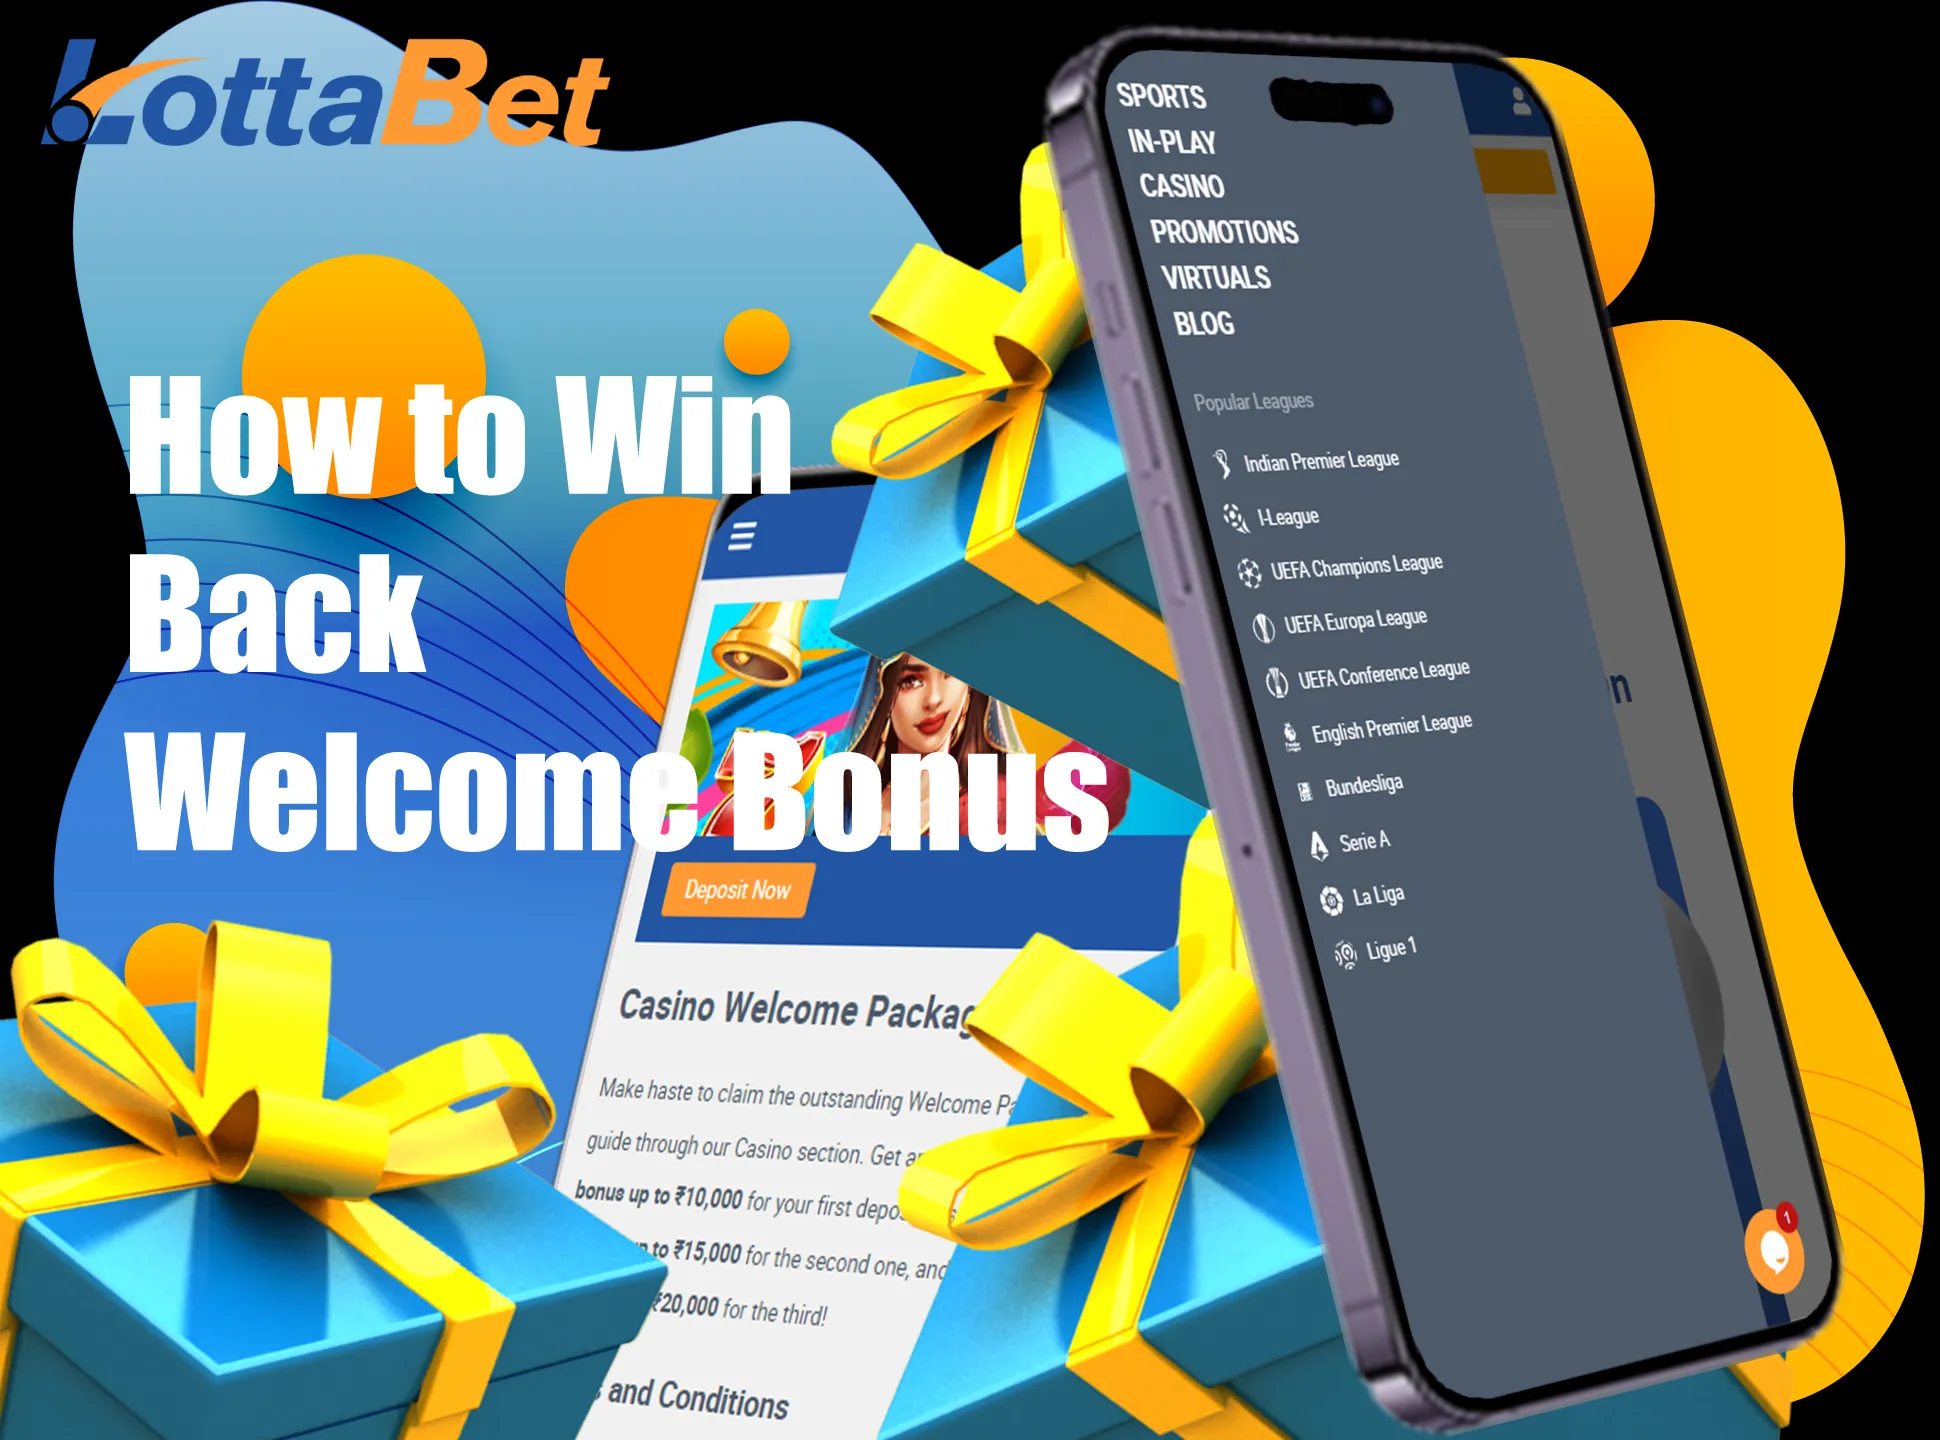 Meet all the requirements to win back you bonus money.